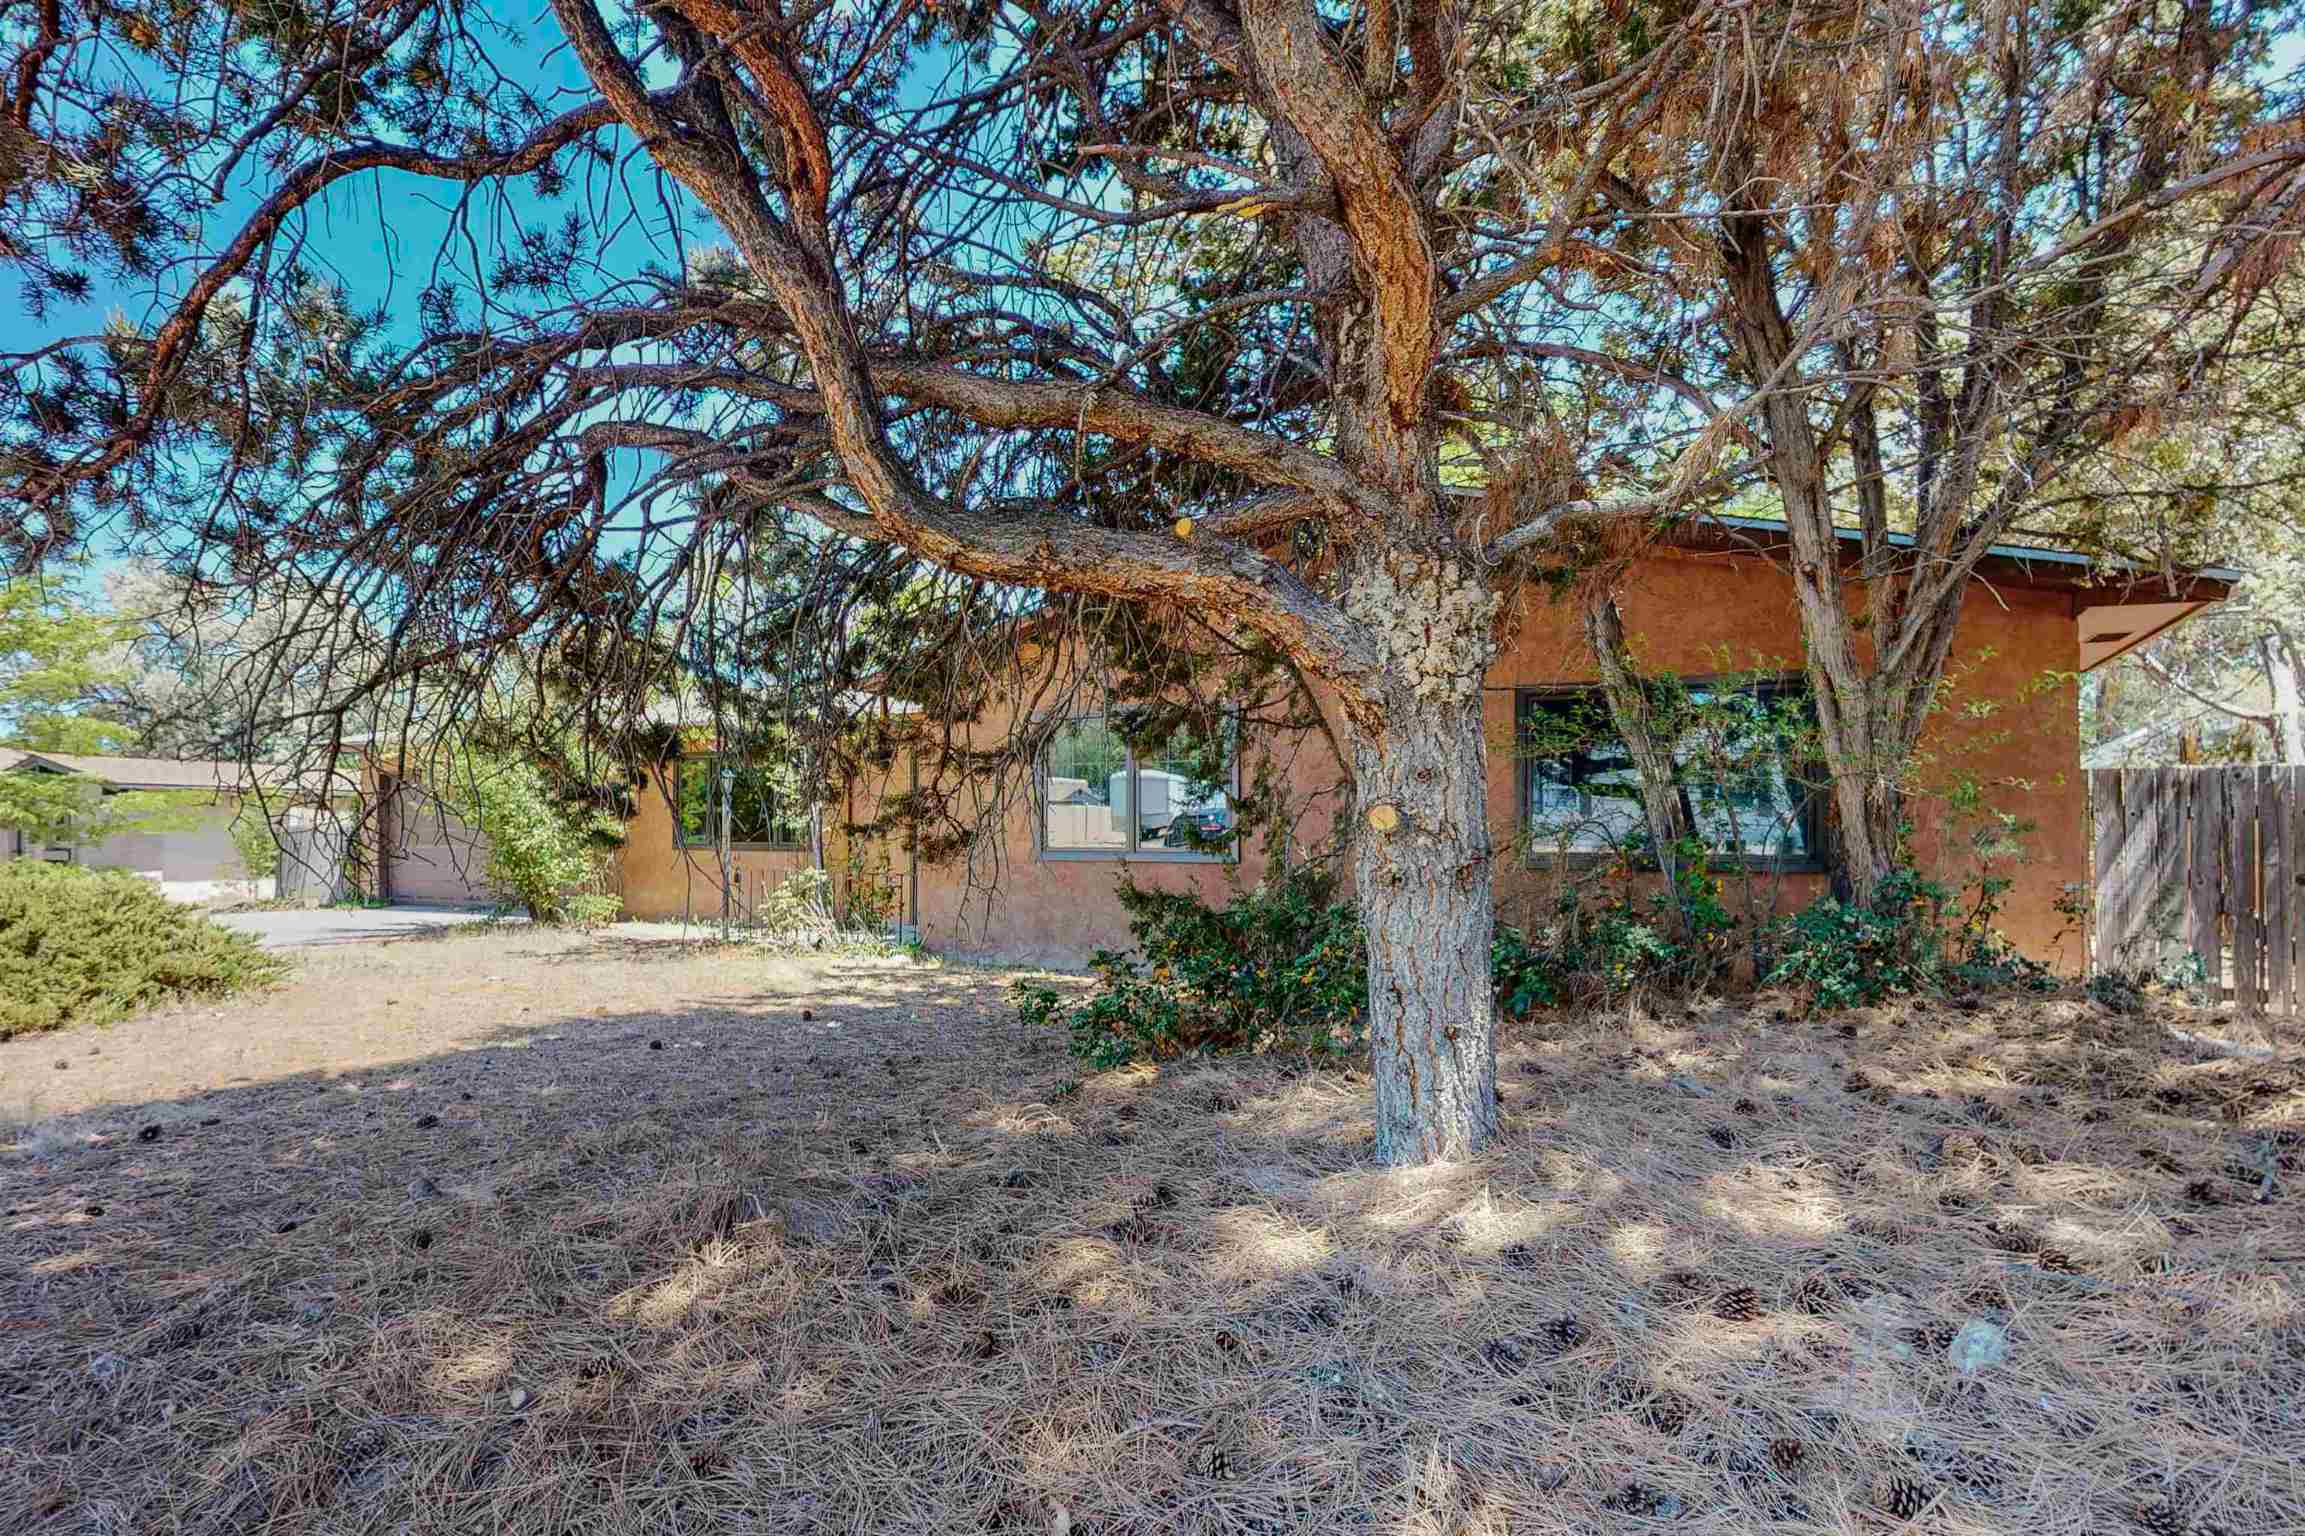 275 DONNA, Los Alamos, New Mexico 87544, 4 Bedrooms Bedrooms, ,2 BathroomsBathrooms,Residential,For Sale,275 DONNA,202201895